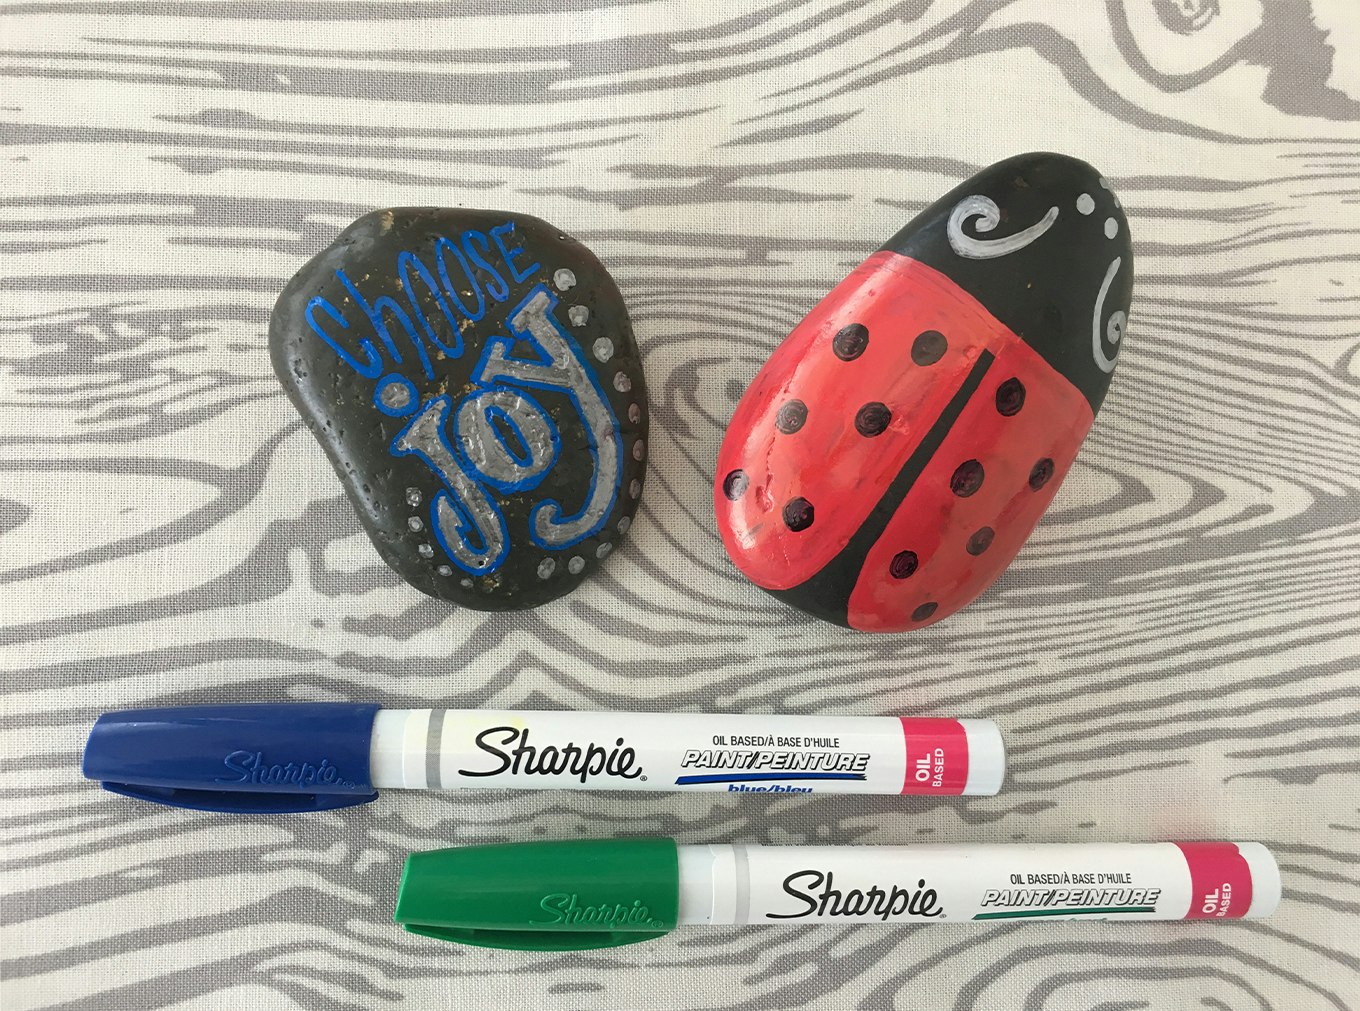 ROCK PAINTING